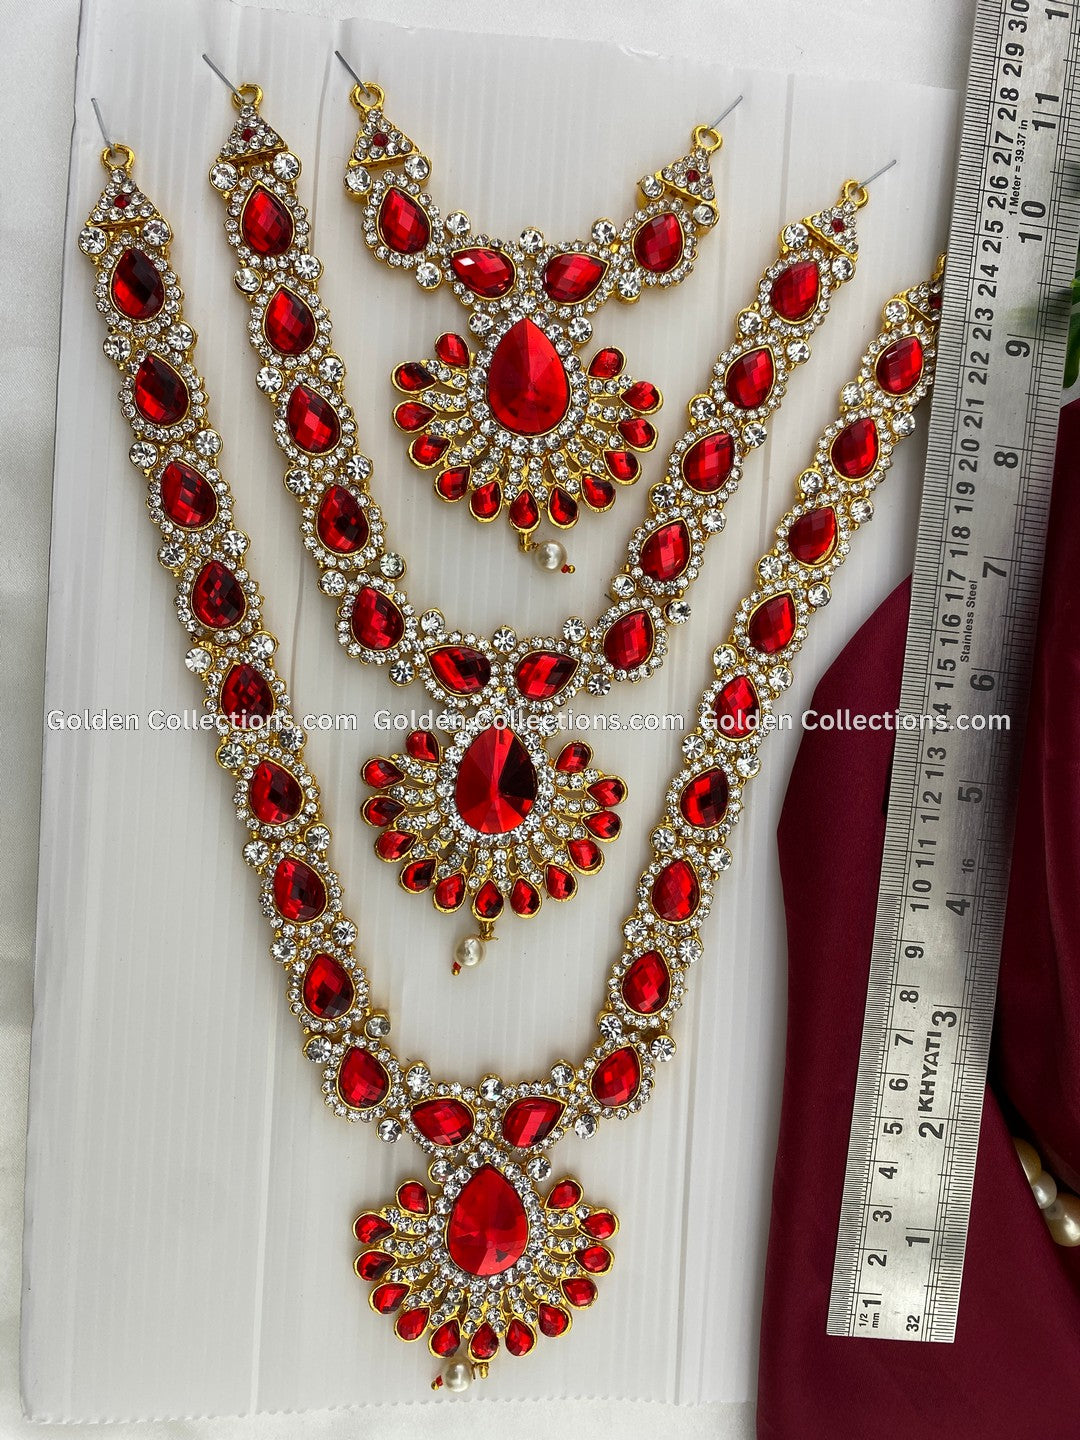 Deity Jewellery - Sacred Ornaments - GoldenCollections 2